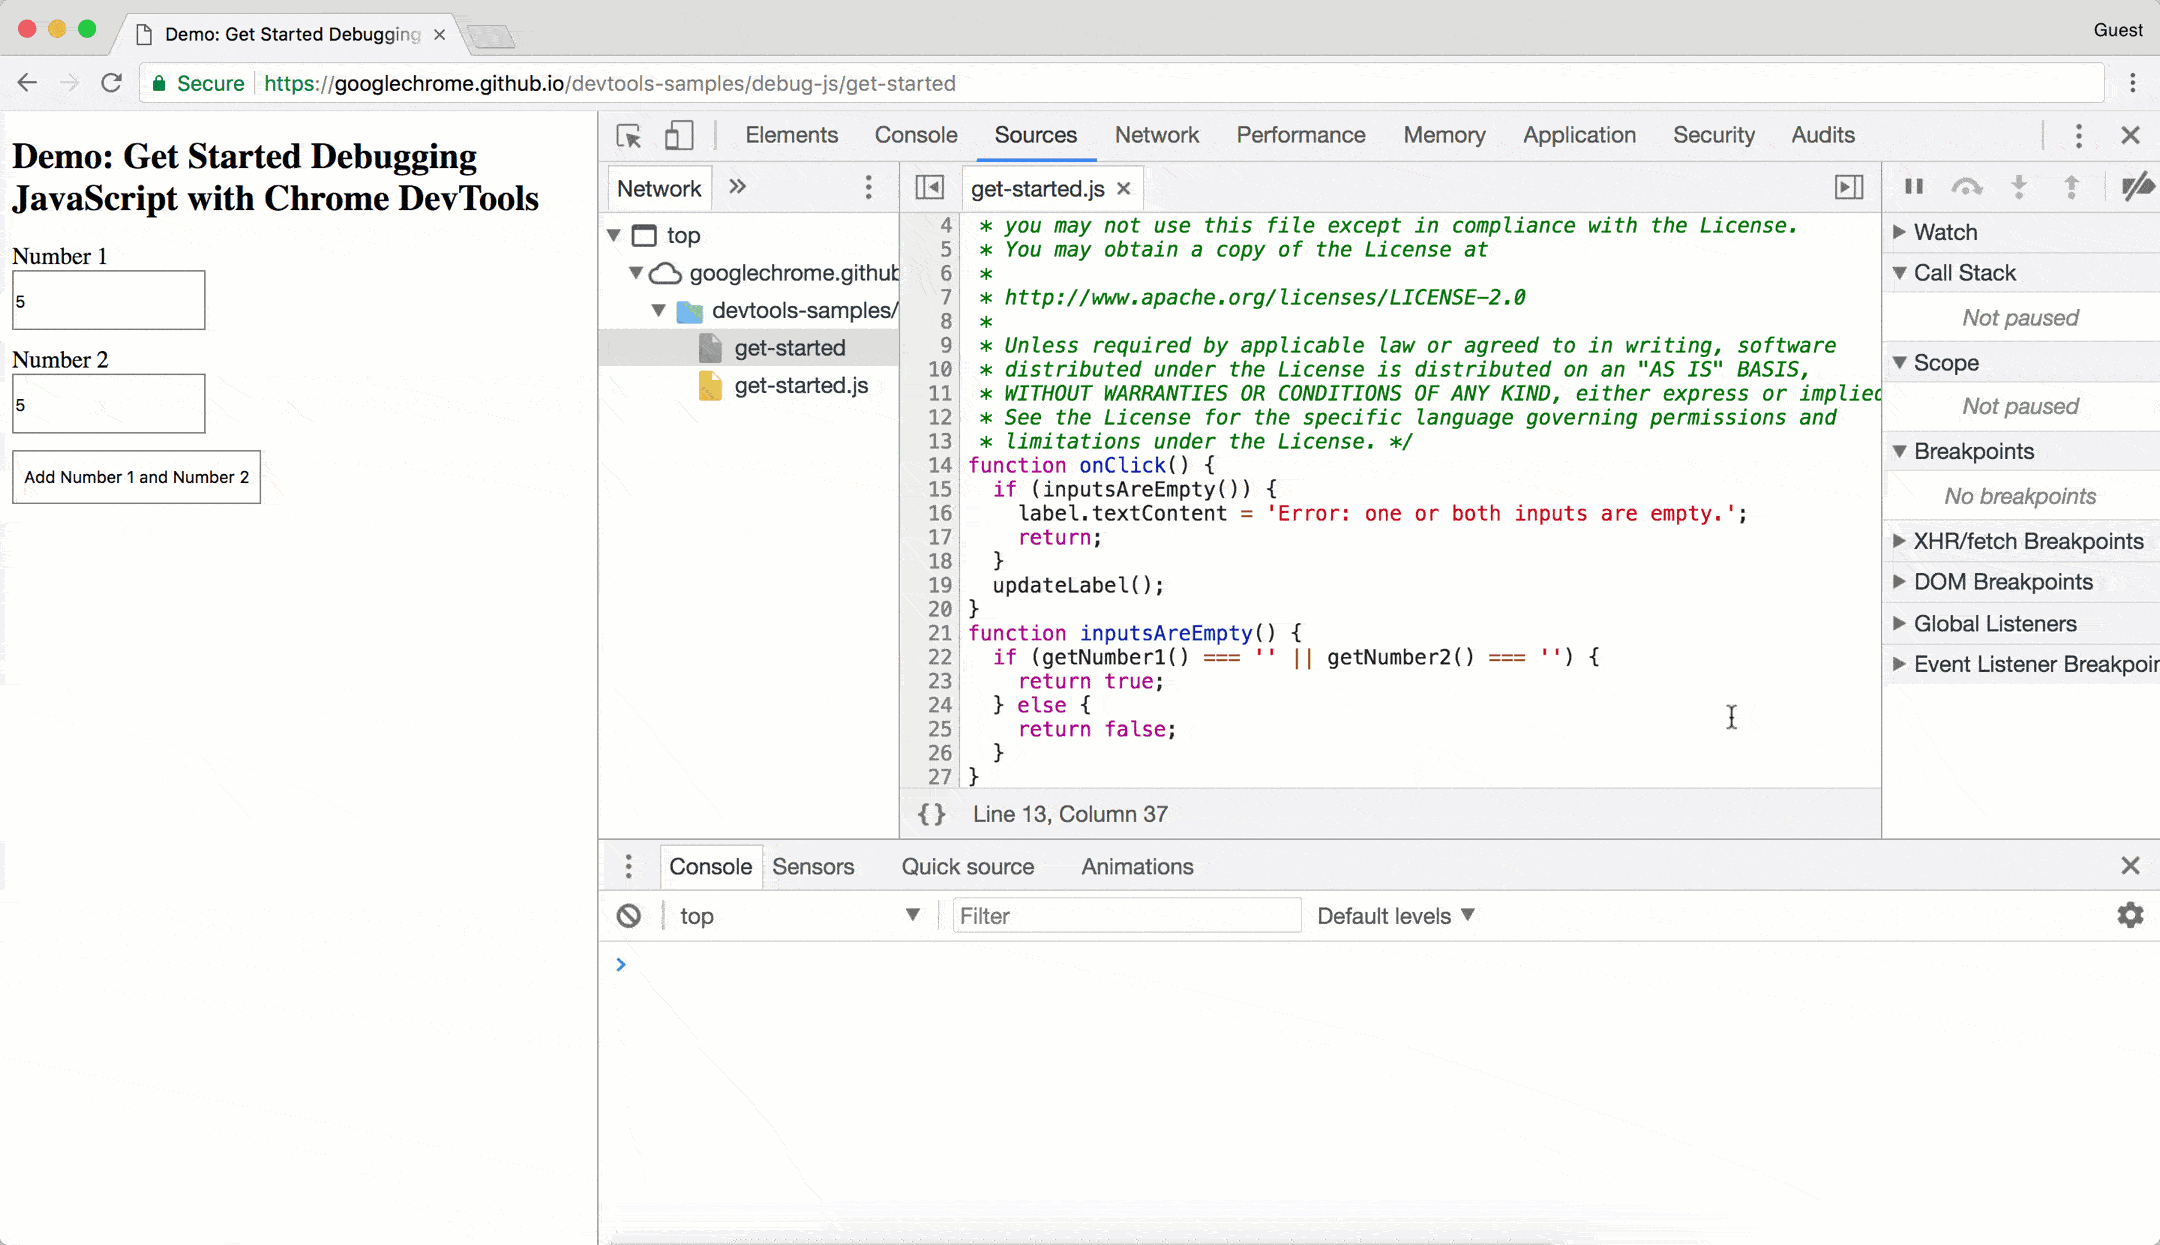 Sources in Chrome DevTools